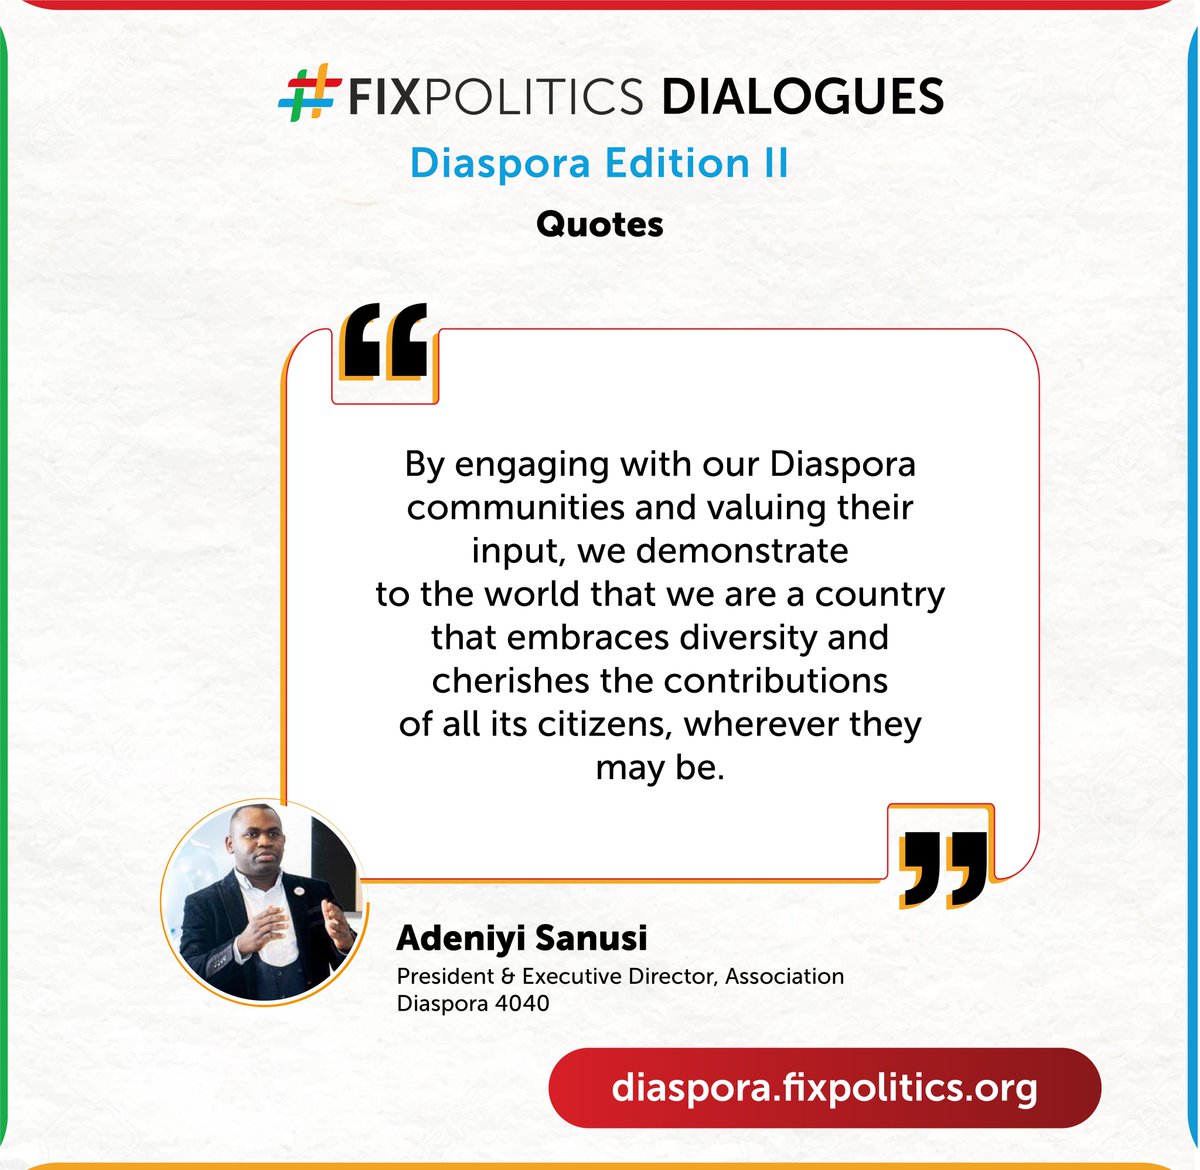 'By engaging with our Diaspora communities and valuing their input, we demonstrate to the world that we are a country that embraces diversity' - Adeniyi Sanusi at the #FixPolitics Diaspora Dialogue II. Watch this space for the next edition.